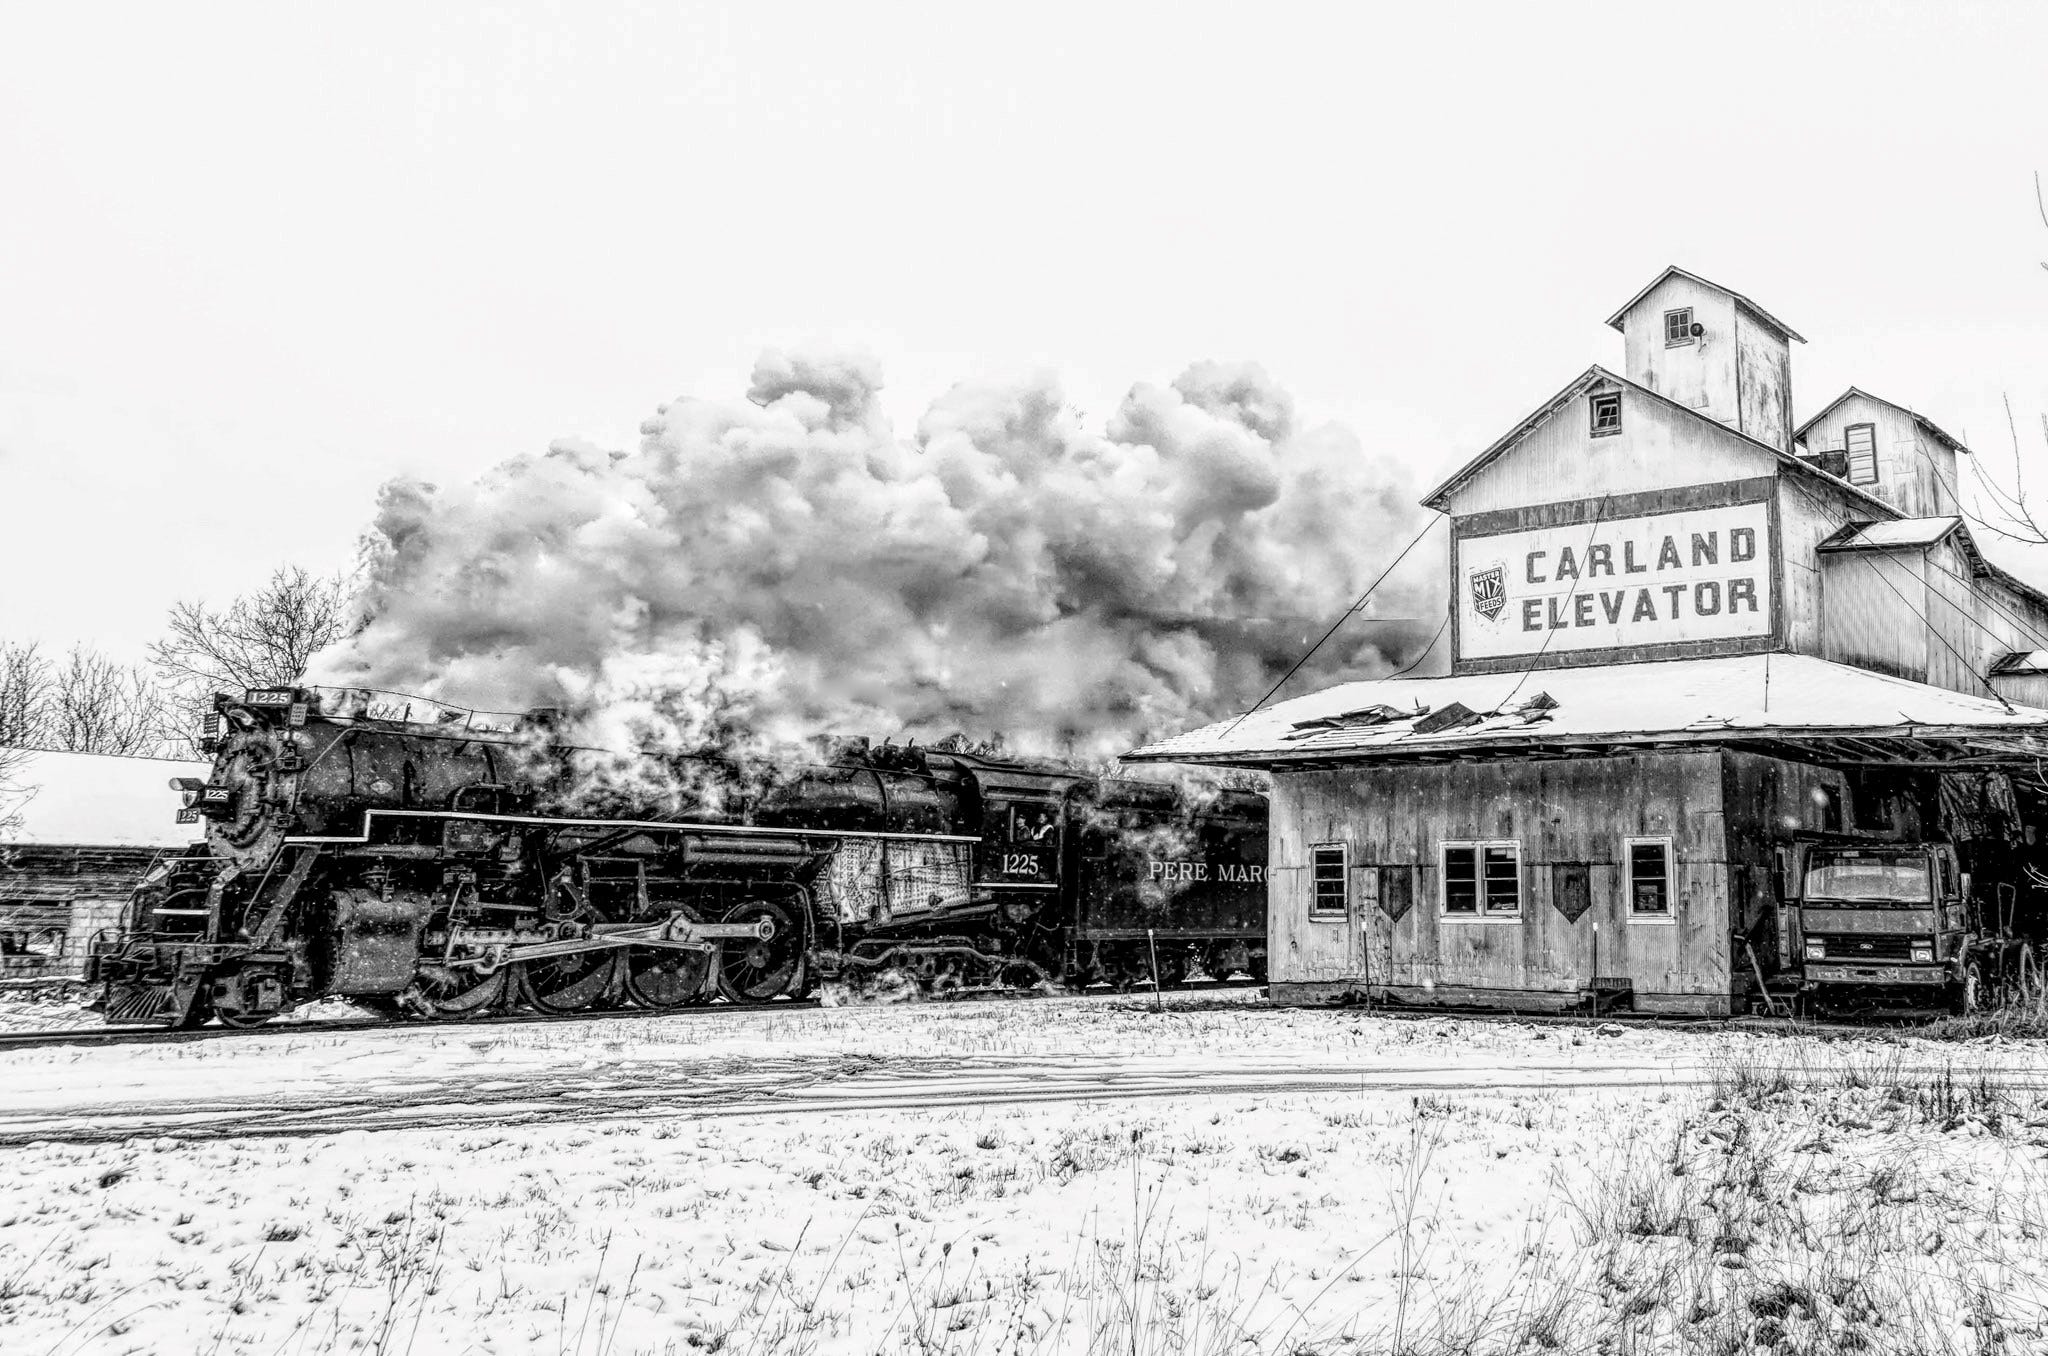 " Each holiday season our local camera club travels to the Owosso area to photograph this 1940s era steam locomotive, " said Glen Suszko of Shelby Twp. " This picture was taken as The Polar Express ( aka Pere Marquette 1225 ) steamed past the grain elevator in Carland, Michigan. As it rolls by, the sight, sound and feel of this train engine is a breathtaking experience.